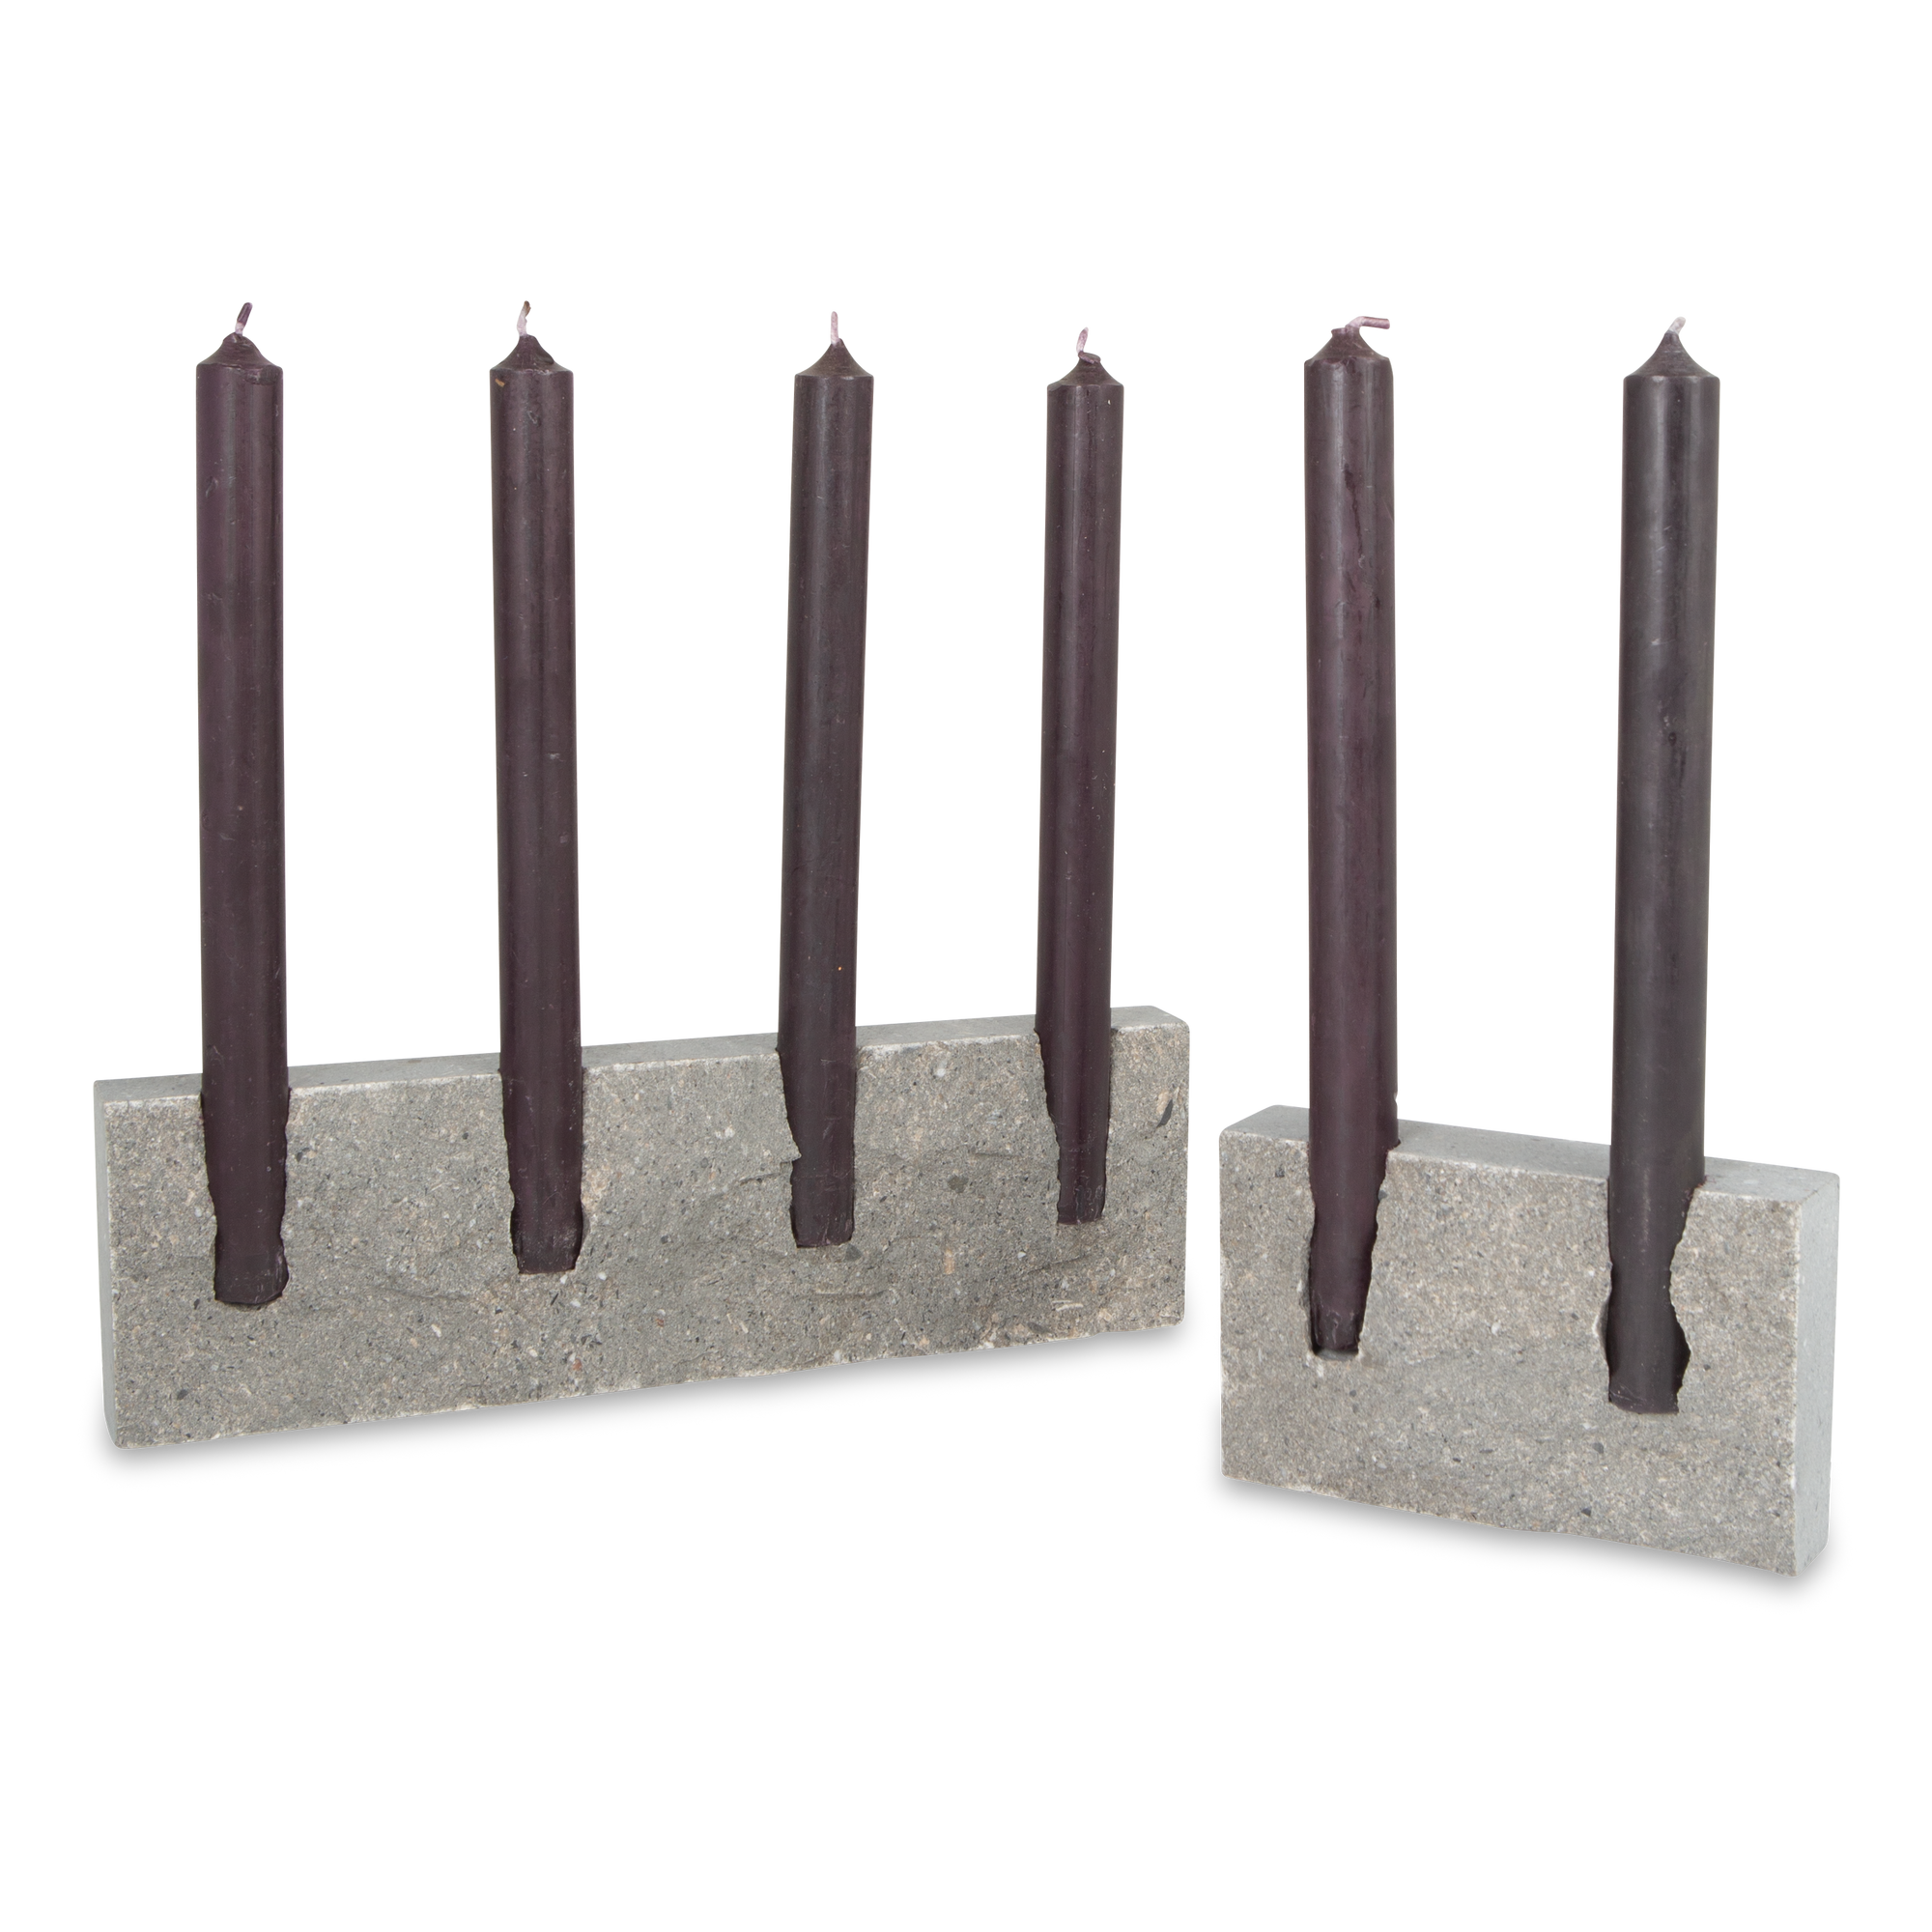 Snug candleholders are handmade by stonemasons who have been mastering their craft for four generations, dating back to 1880.